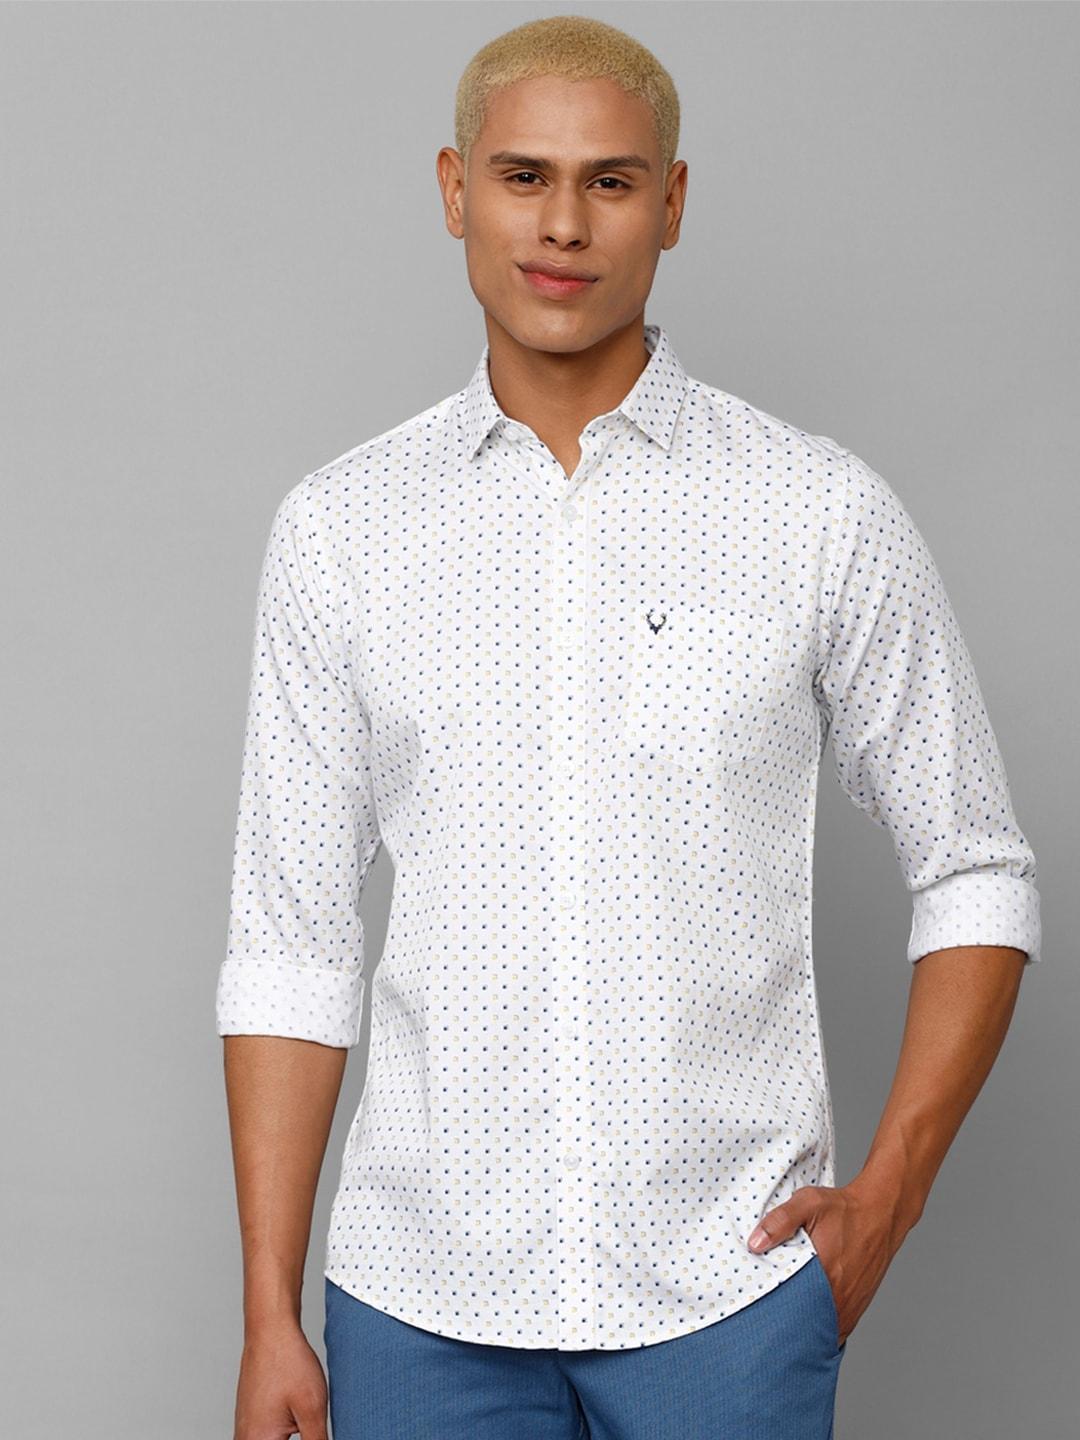 Allen Solly Men Slim Fit Printed Casual Pure Cotton Shirt